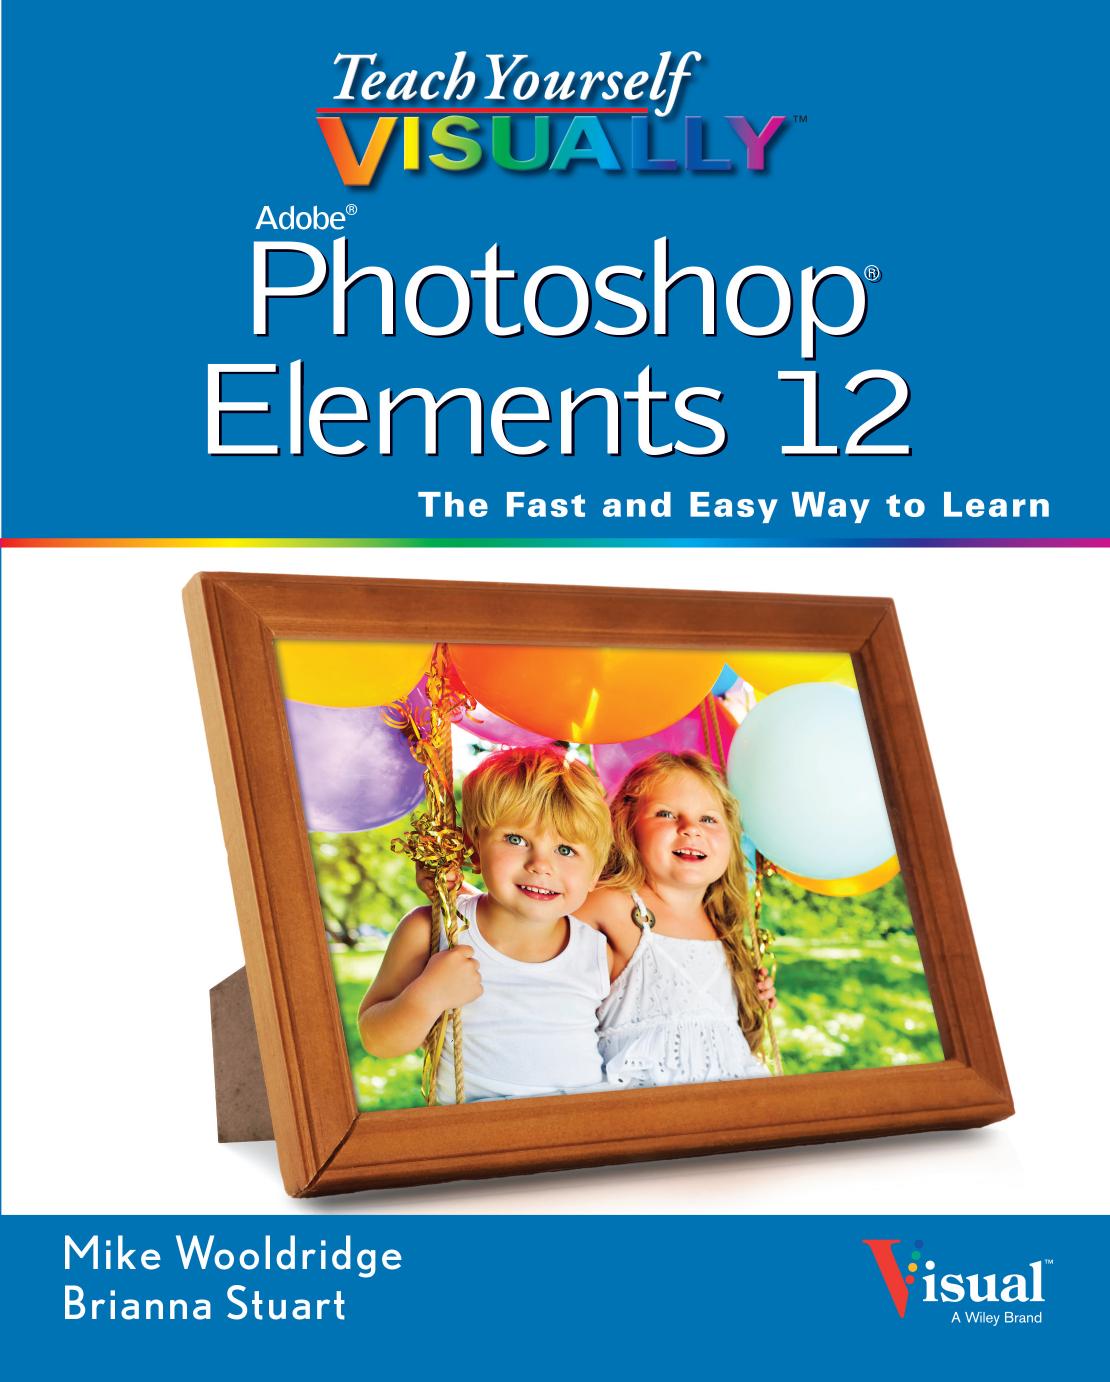 Teach Yourself VISUALLY Photoshop Elements 12 by Mike Wooldridge